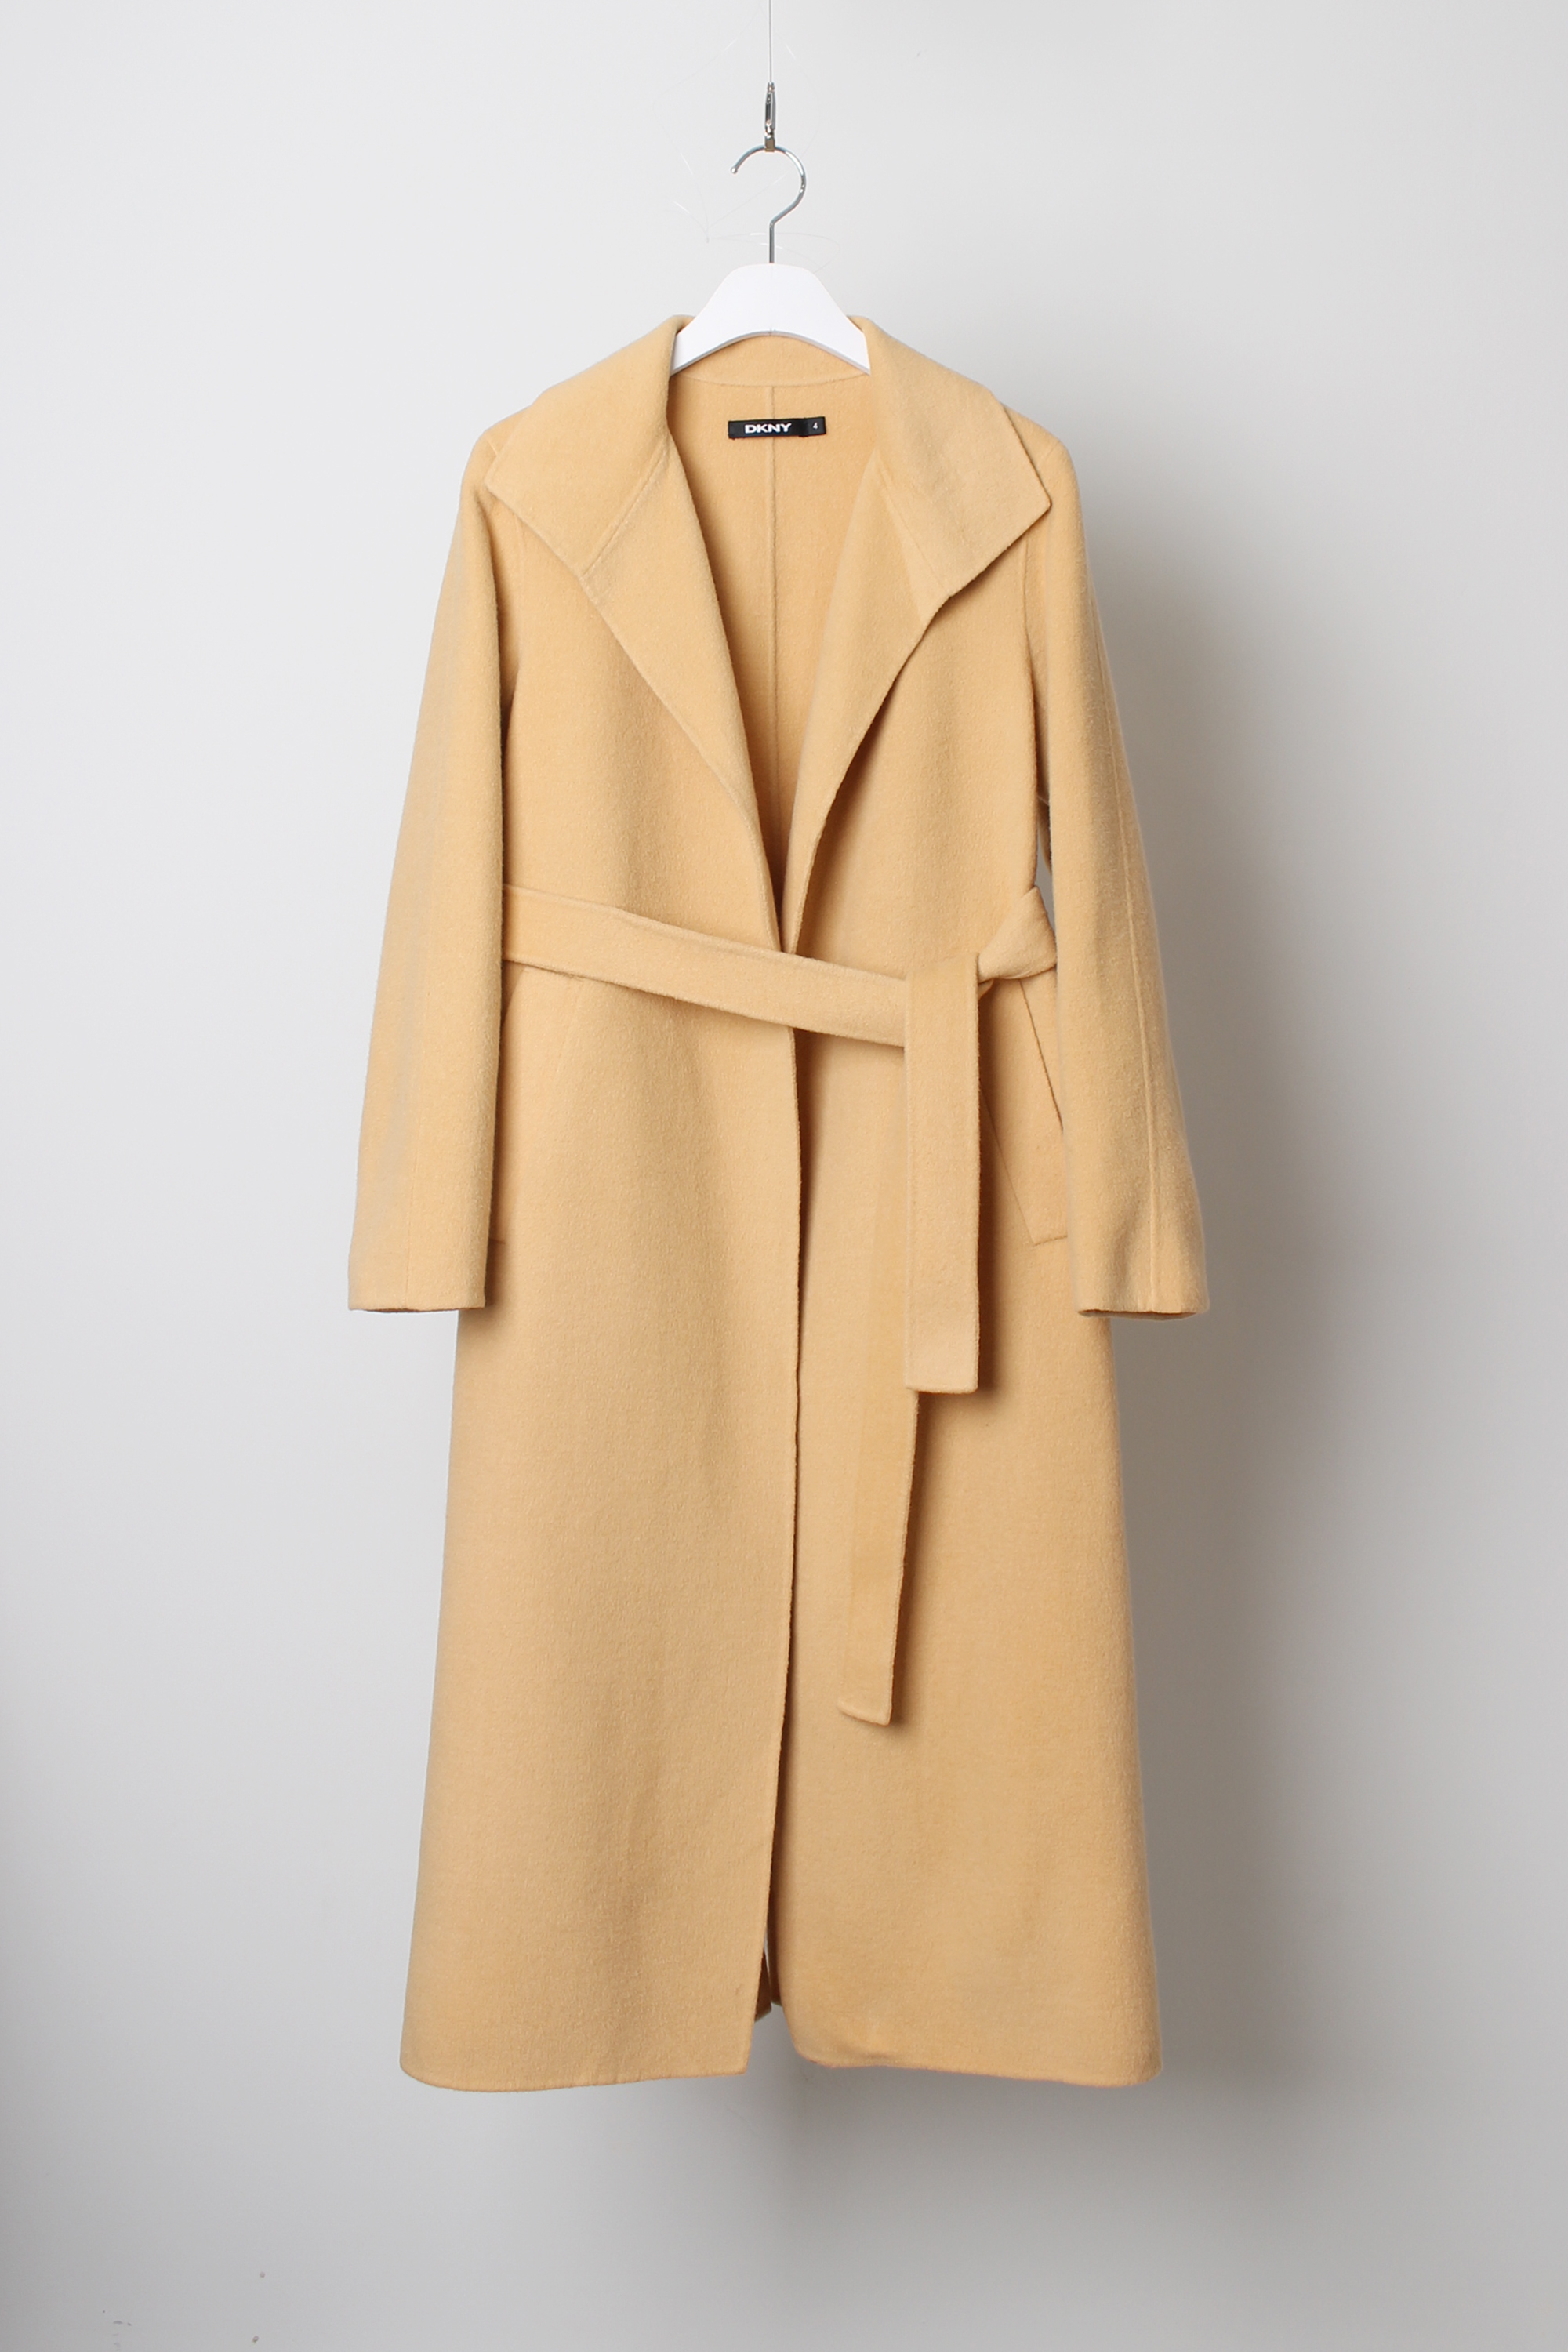 DKNY belted coat